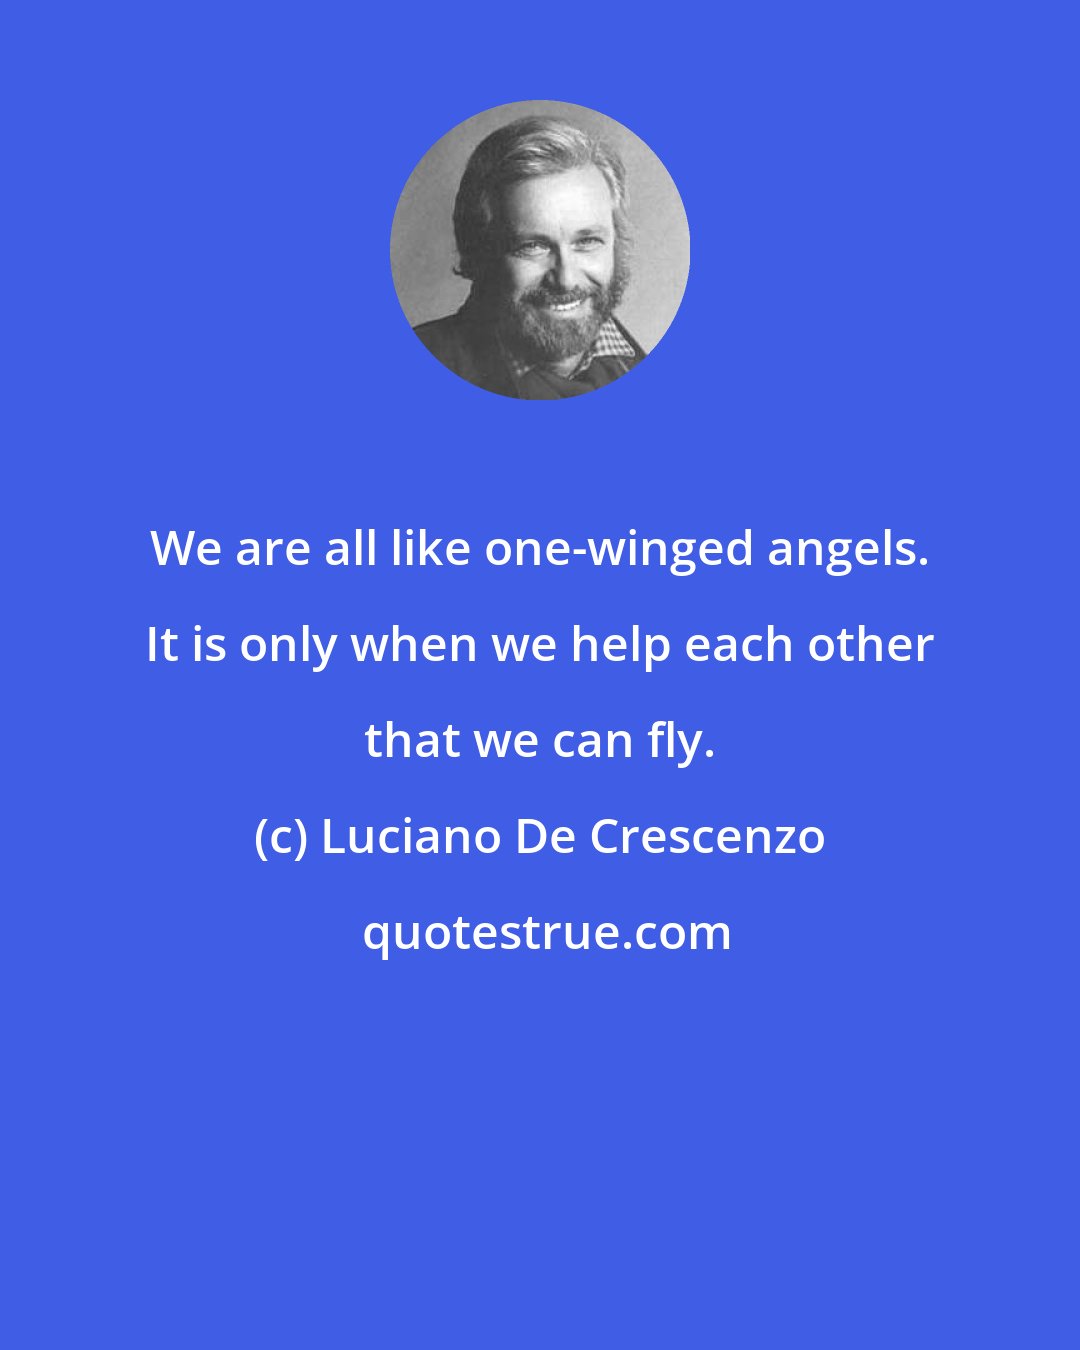 Luciano De Crescenzo: We are all like one-winged angels. It is only when we help each other that we can fly.